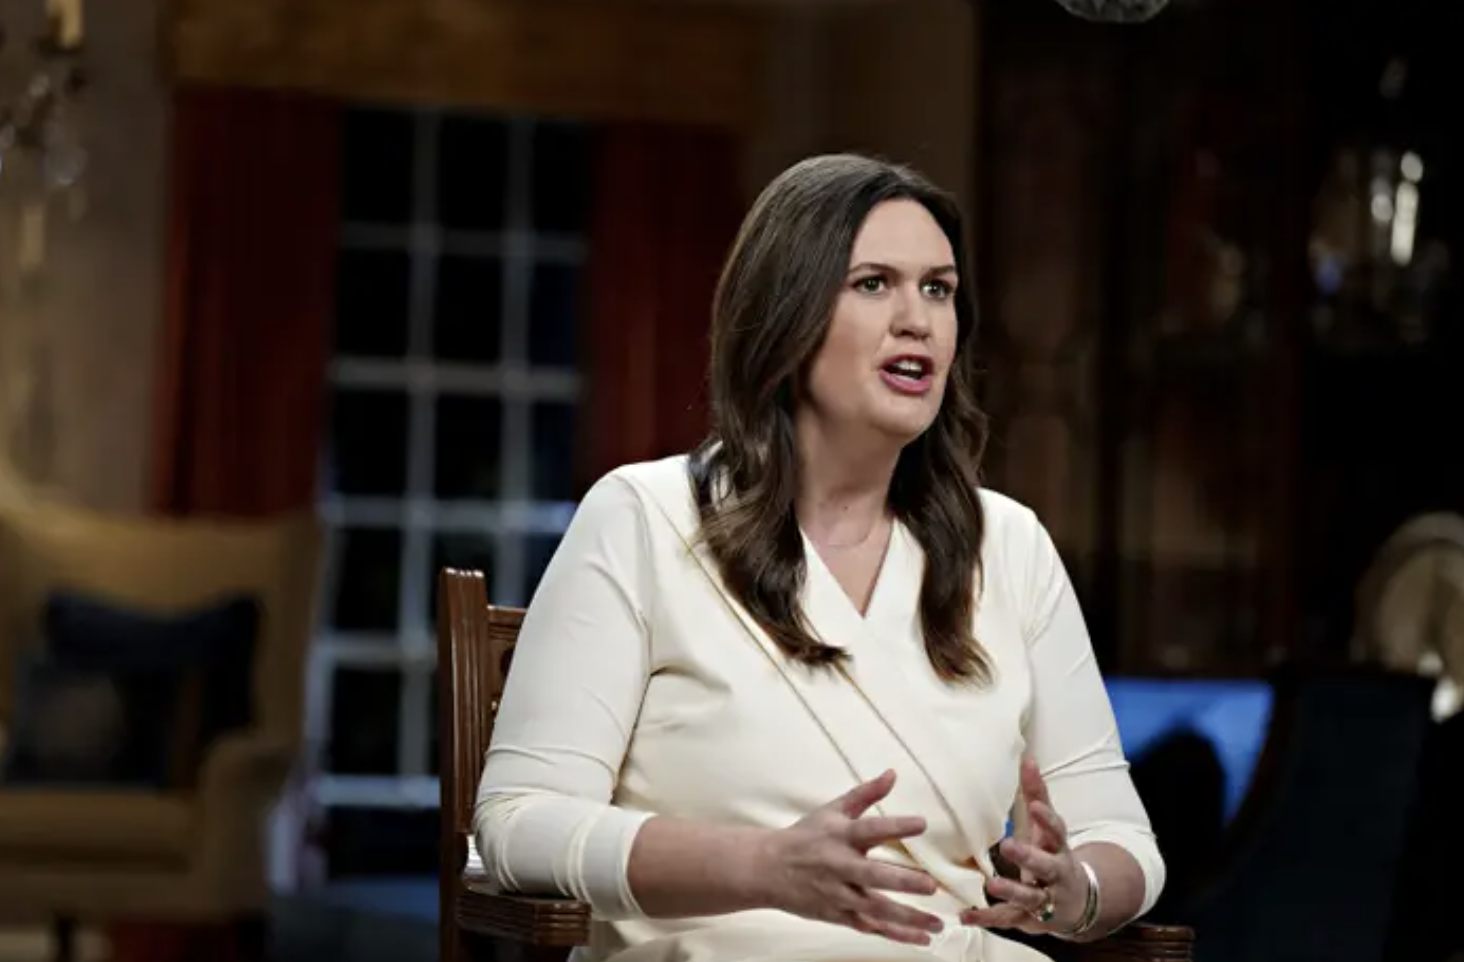 Sarah Huckabee Sanders sits in a chair gesturing with her hands